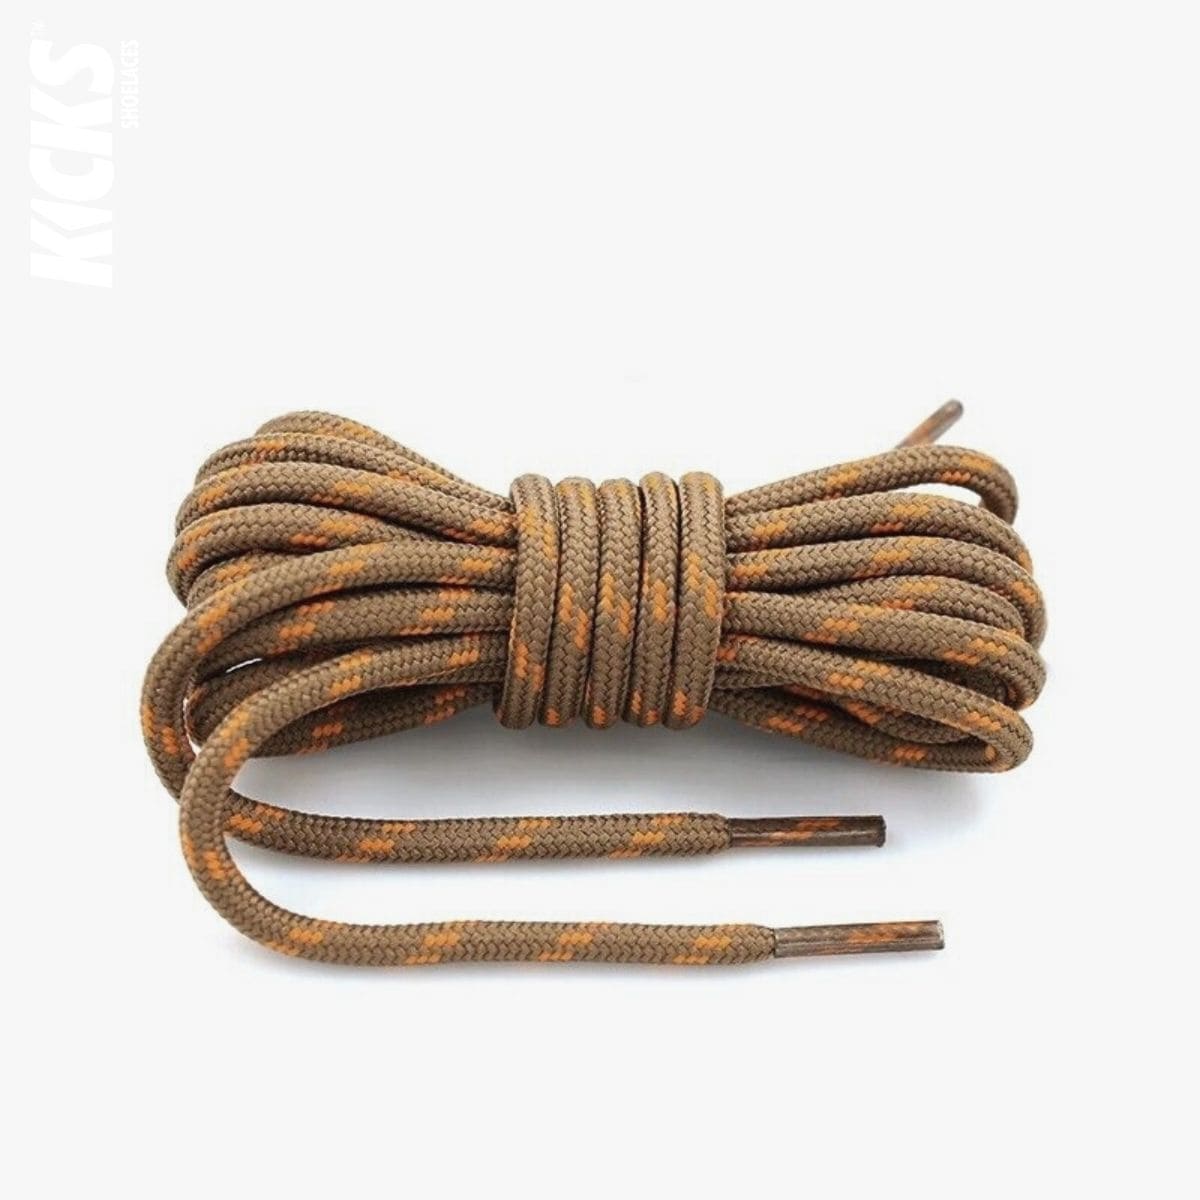 trekking-shoe-laces-united-states-in-brown-and-orange-shop-online